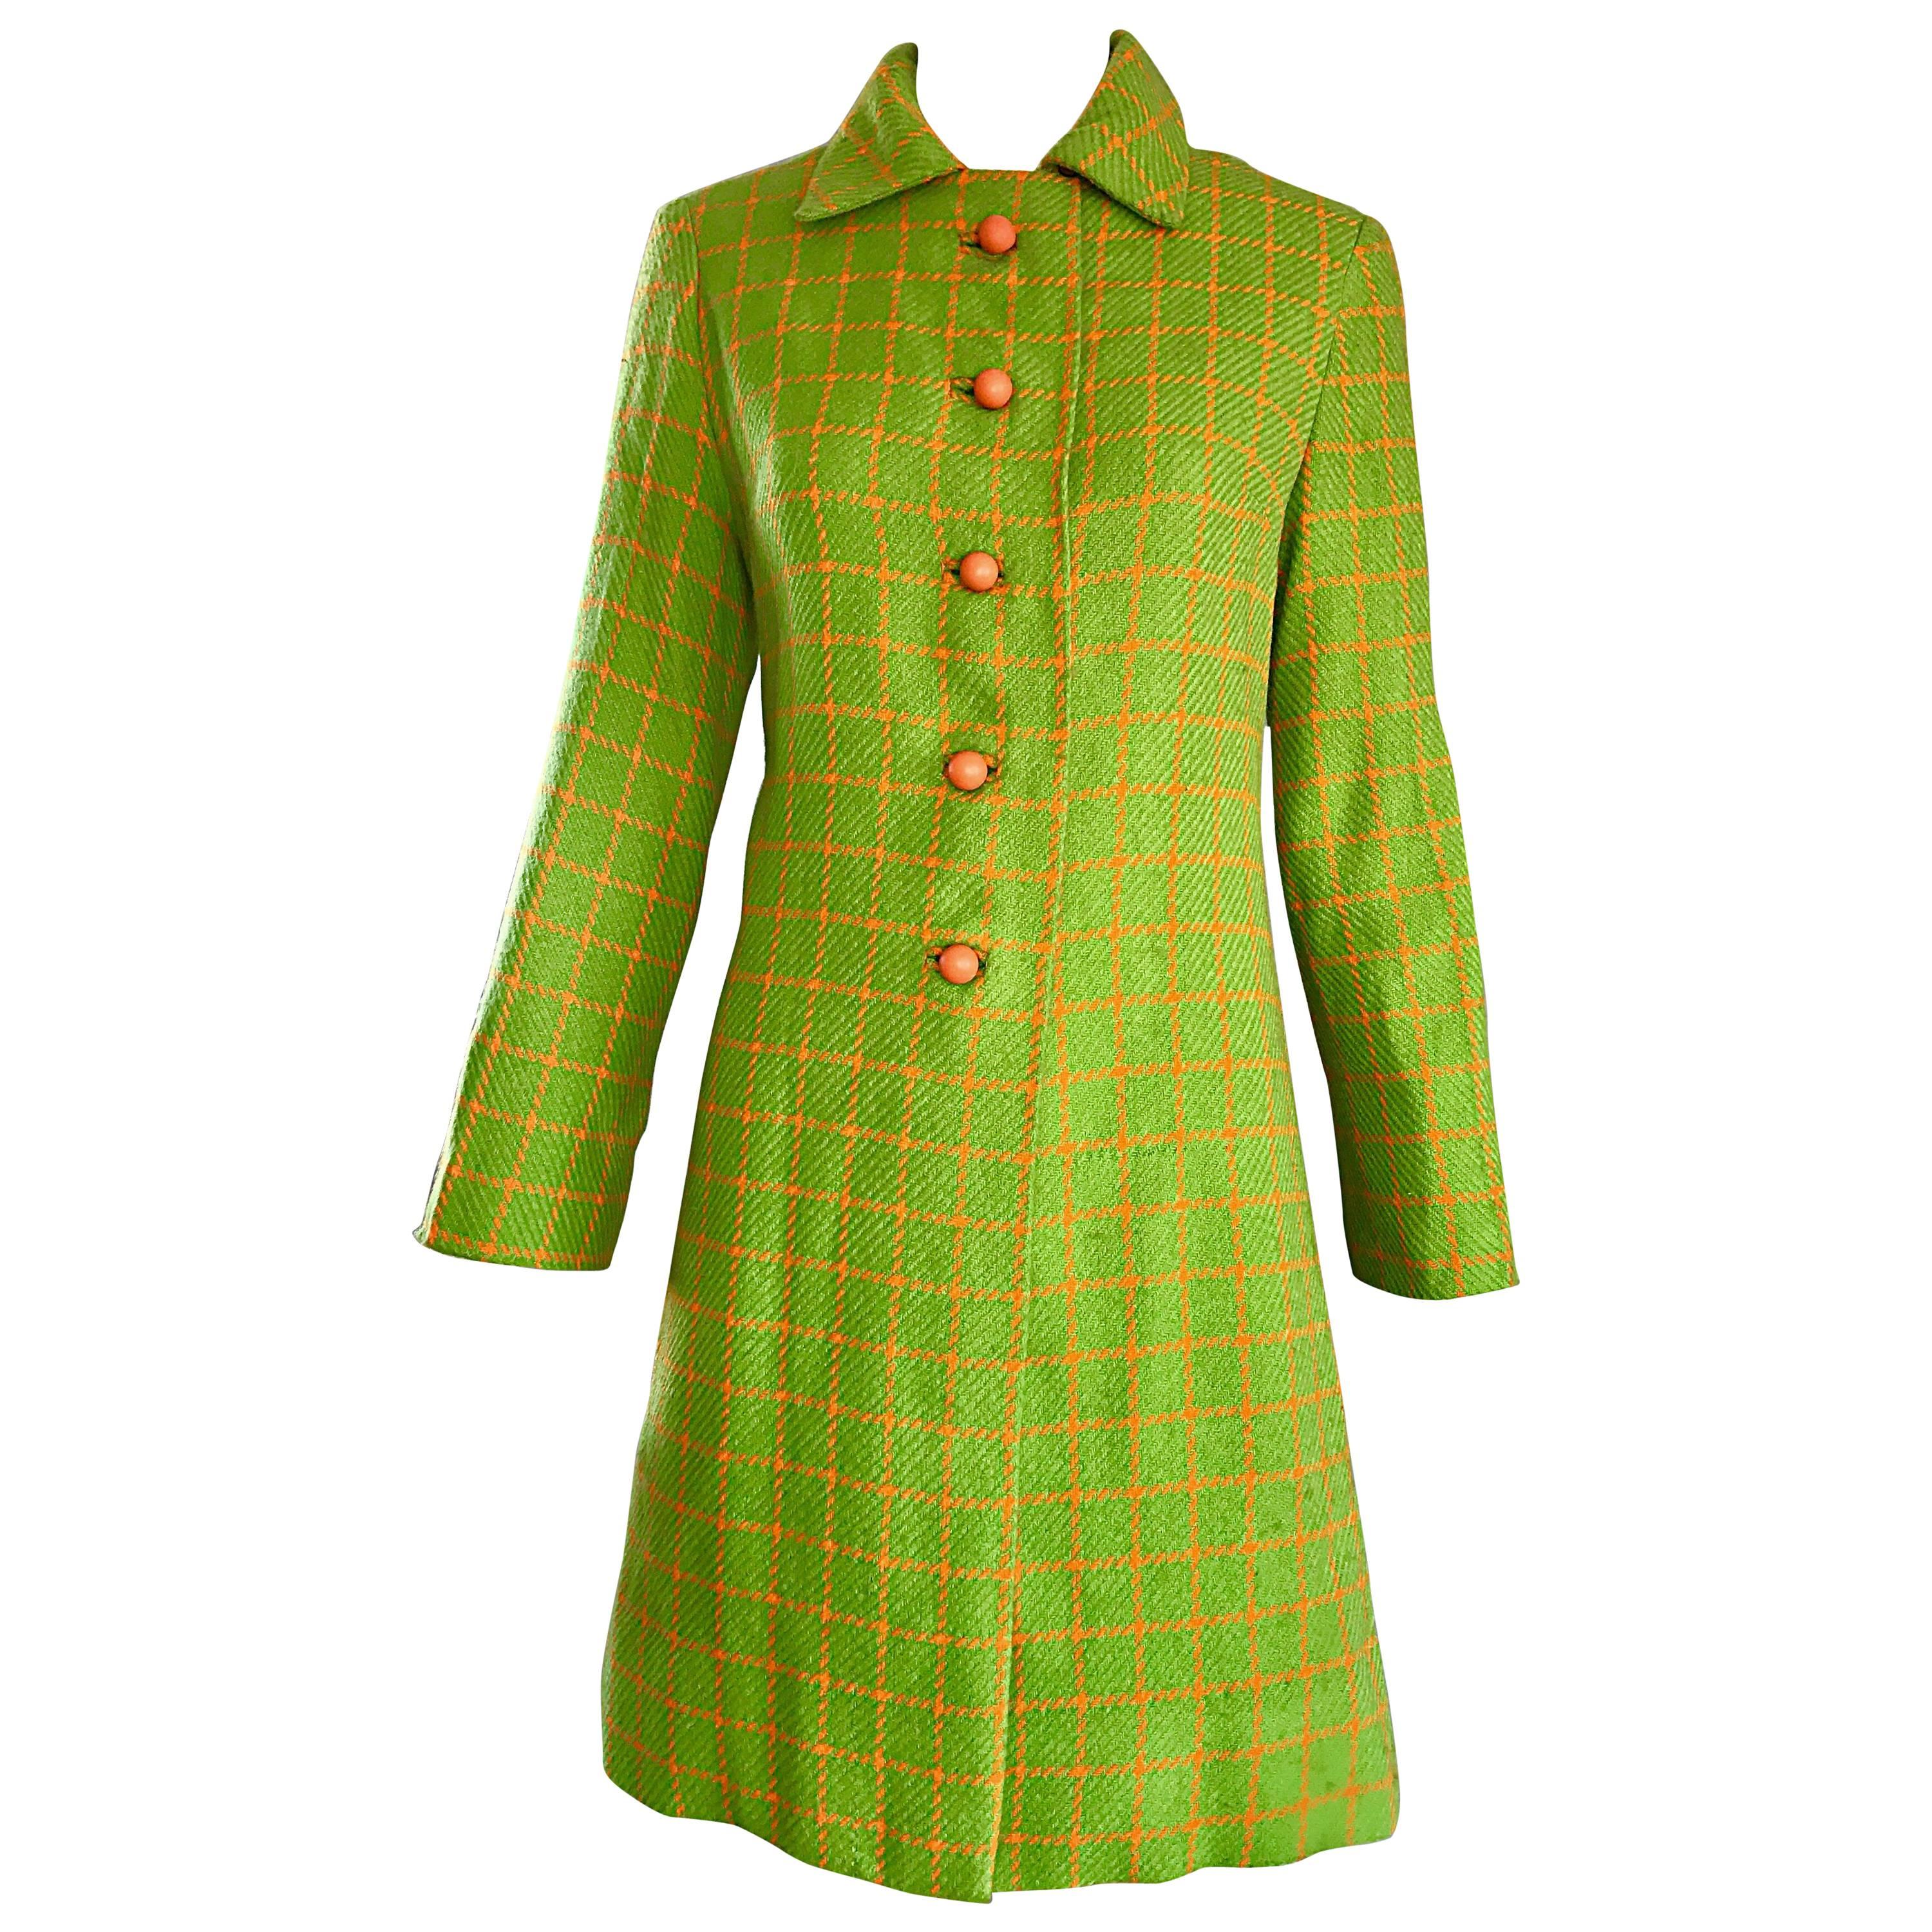 1960s Neon Lime Green and Orange Checkered Vintage 60s Wool Swing Jacket Coat